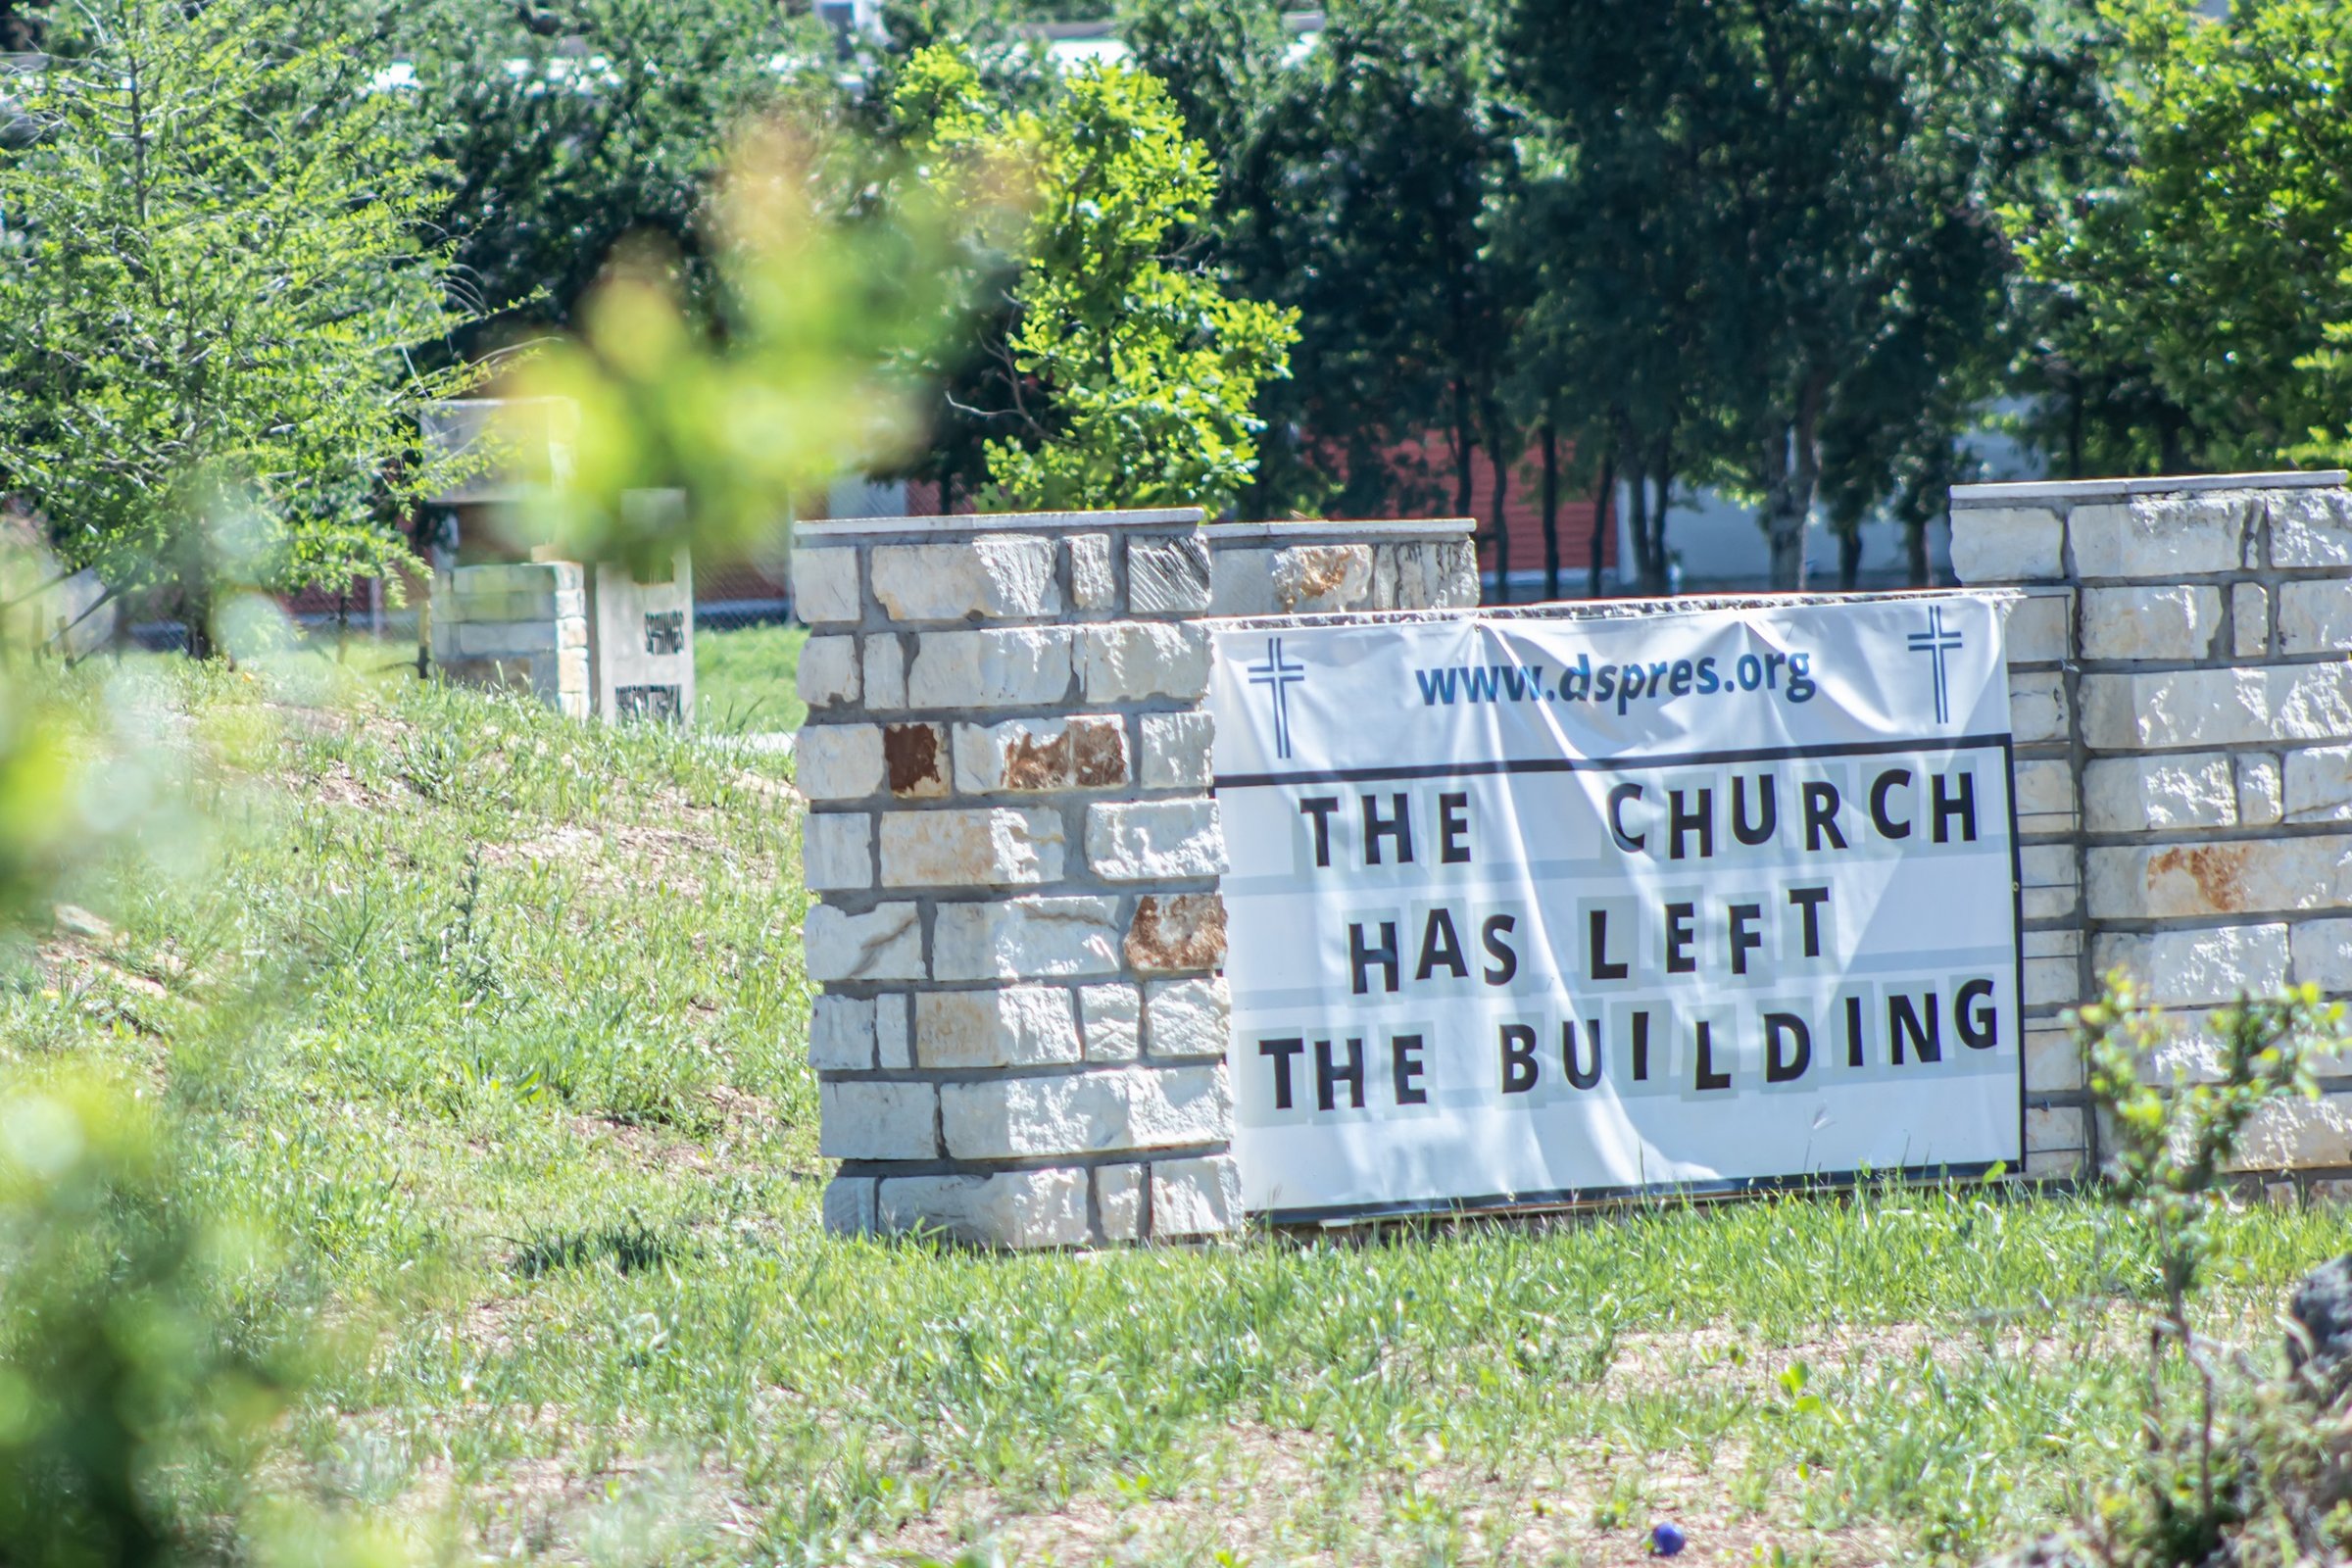 Right now, churches should close